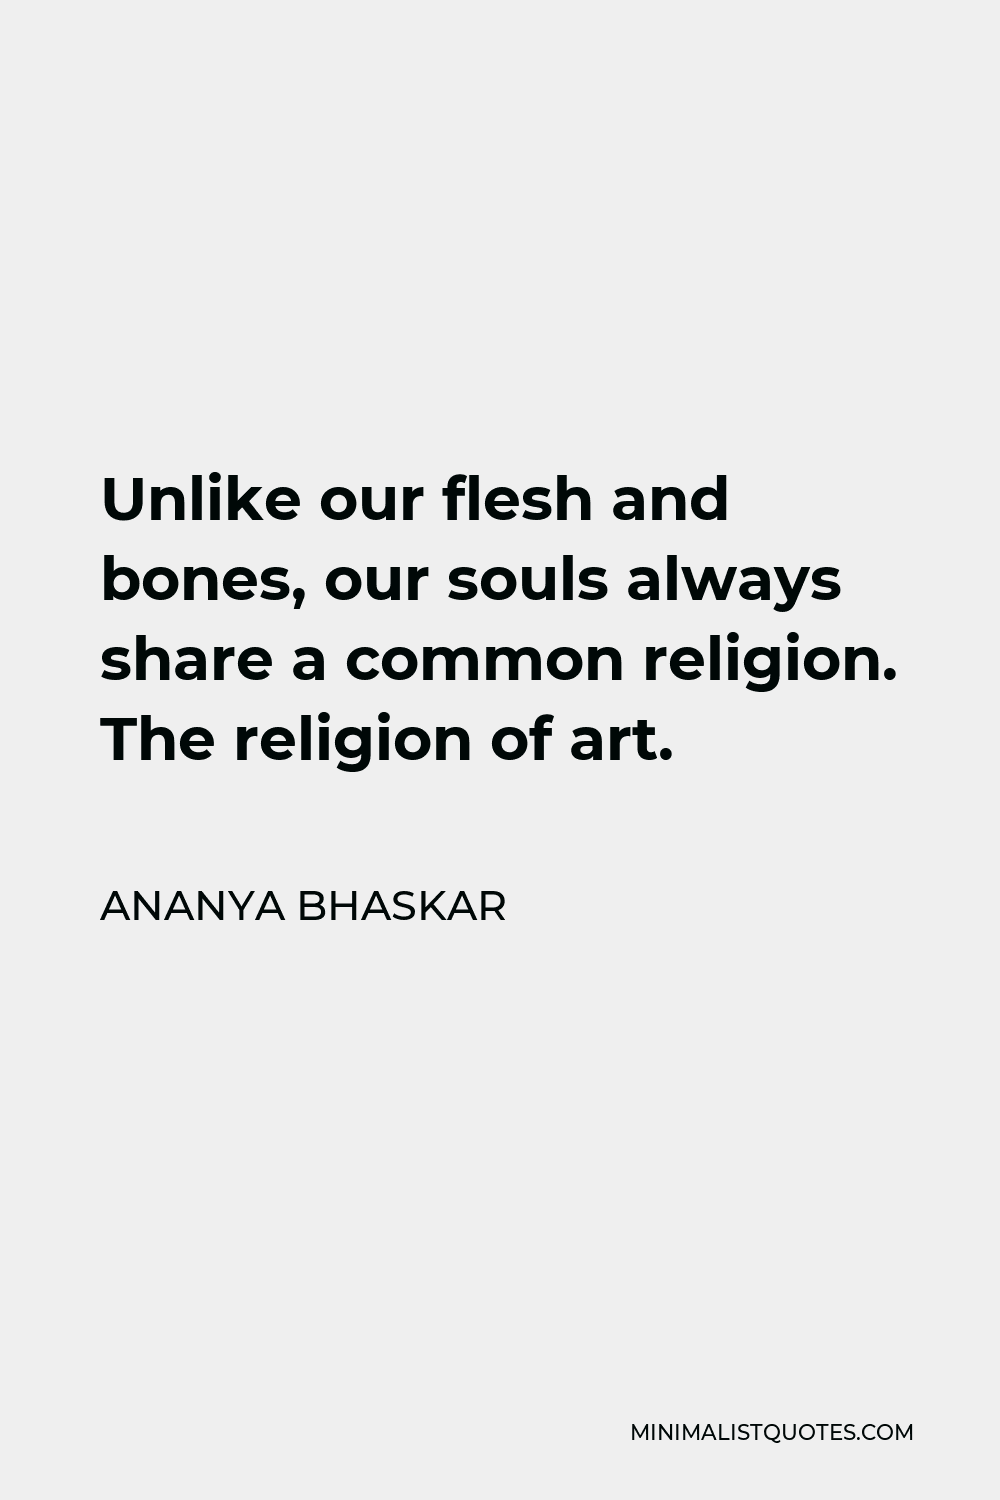 Ananya Bhaskar Quote - Unlike our flesh and bones, our souls always share a common religion. The religion of art.